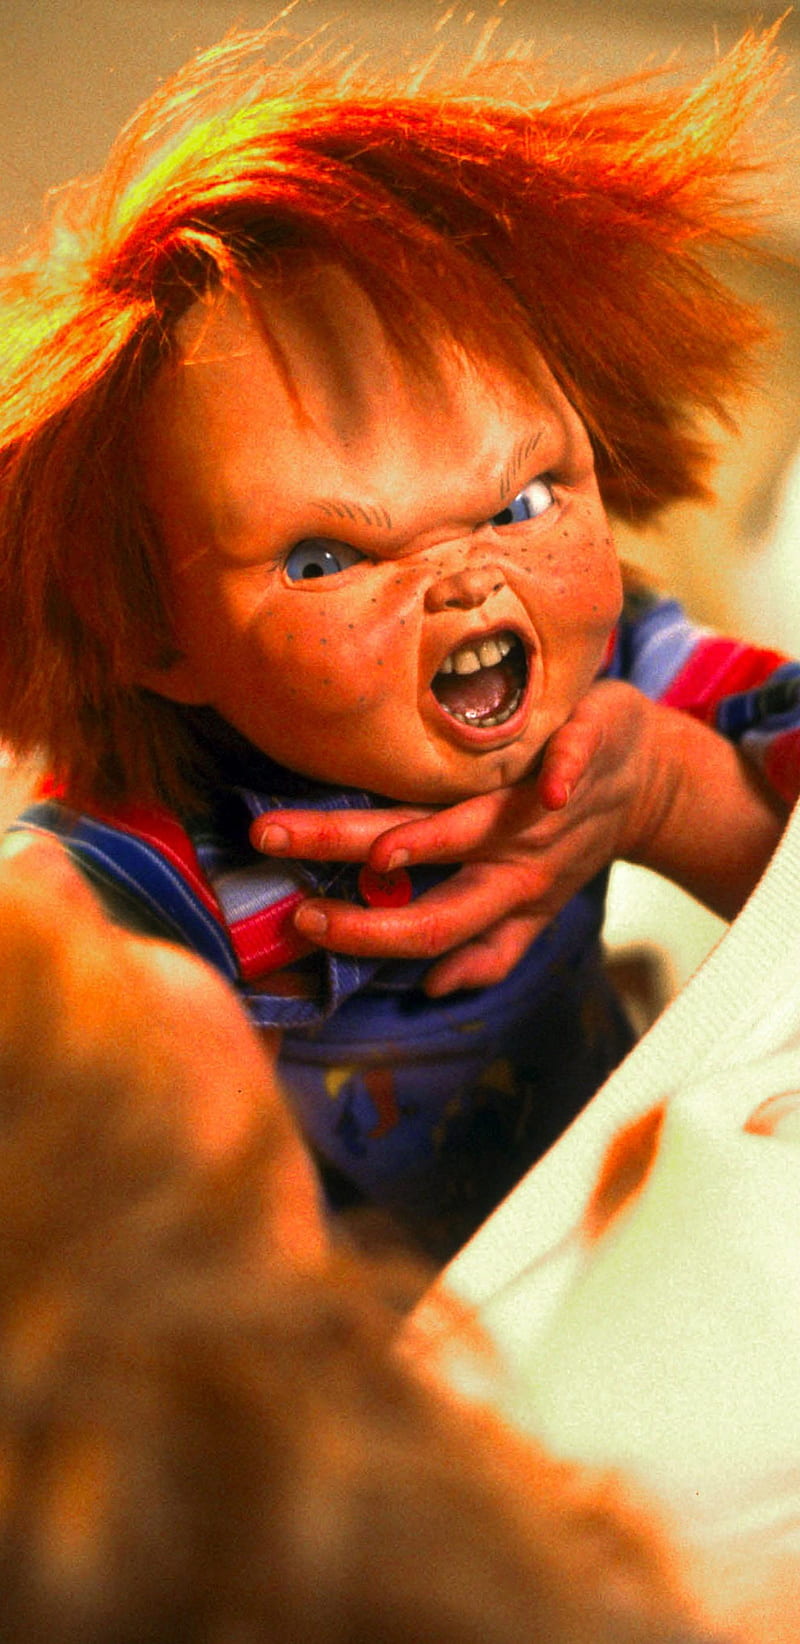 Childs Play Chucky, charles lee ray, childs play, chucky, horror, killer doll, shadeo9, thriller, HD phone wallpaper